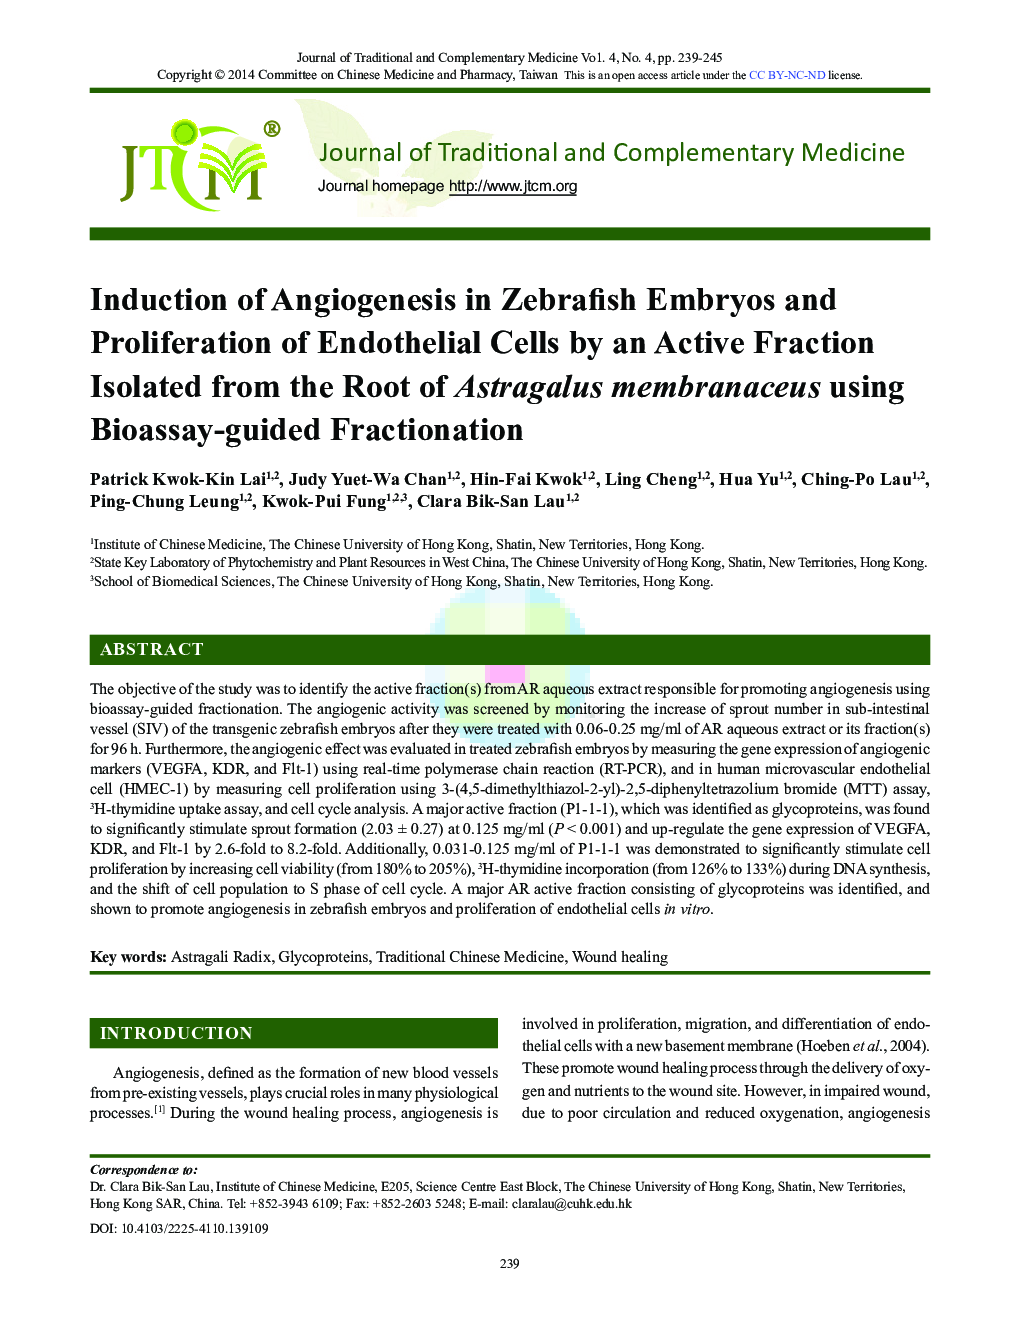 Induction of Angiogenesis in Zebrafish Embryos and Proliferation of Endothelial Cells by an Active Fraction Isolated from the Root of Astragalus membranaceus using Bioassay-guided Fractionation